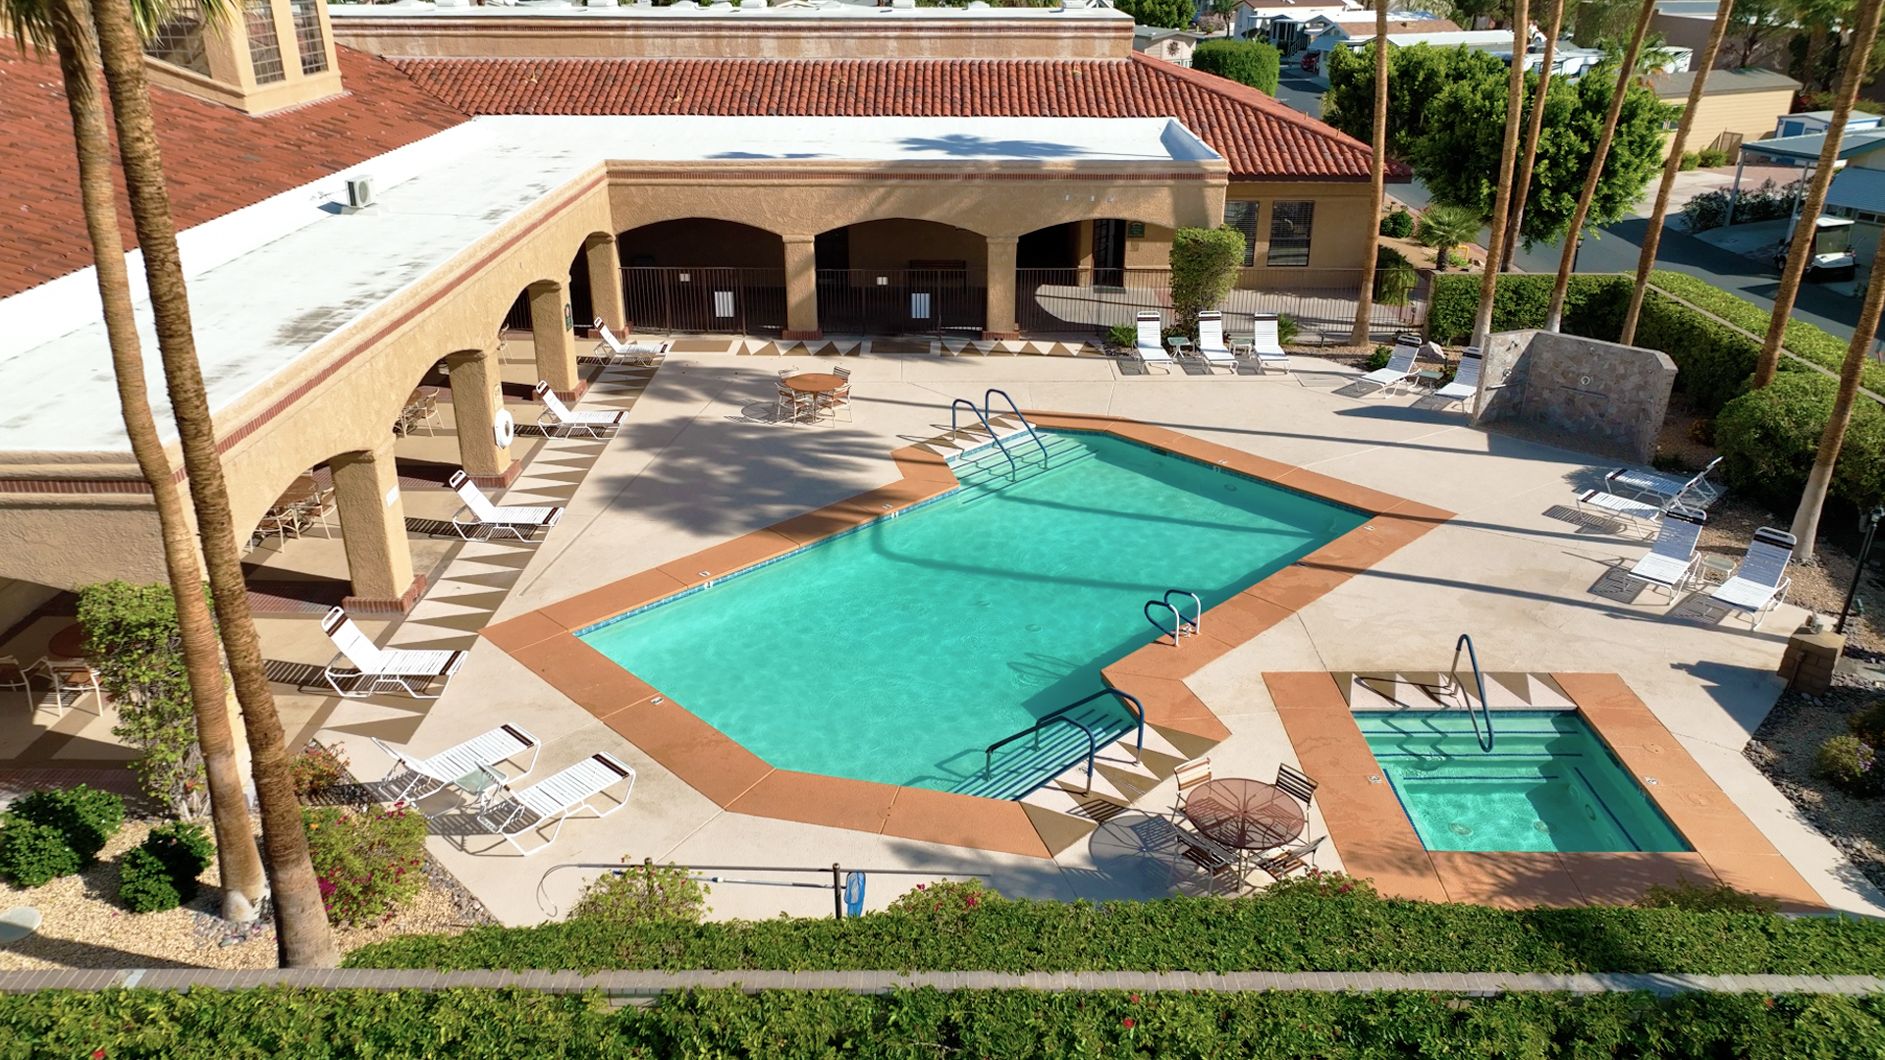 An aerial view of a pool at a hotel.